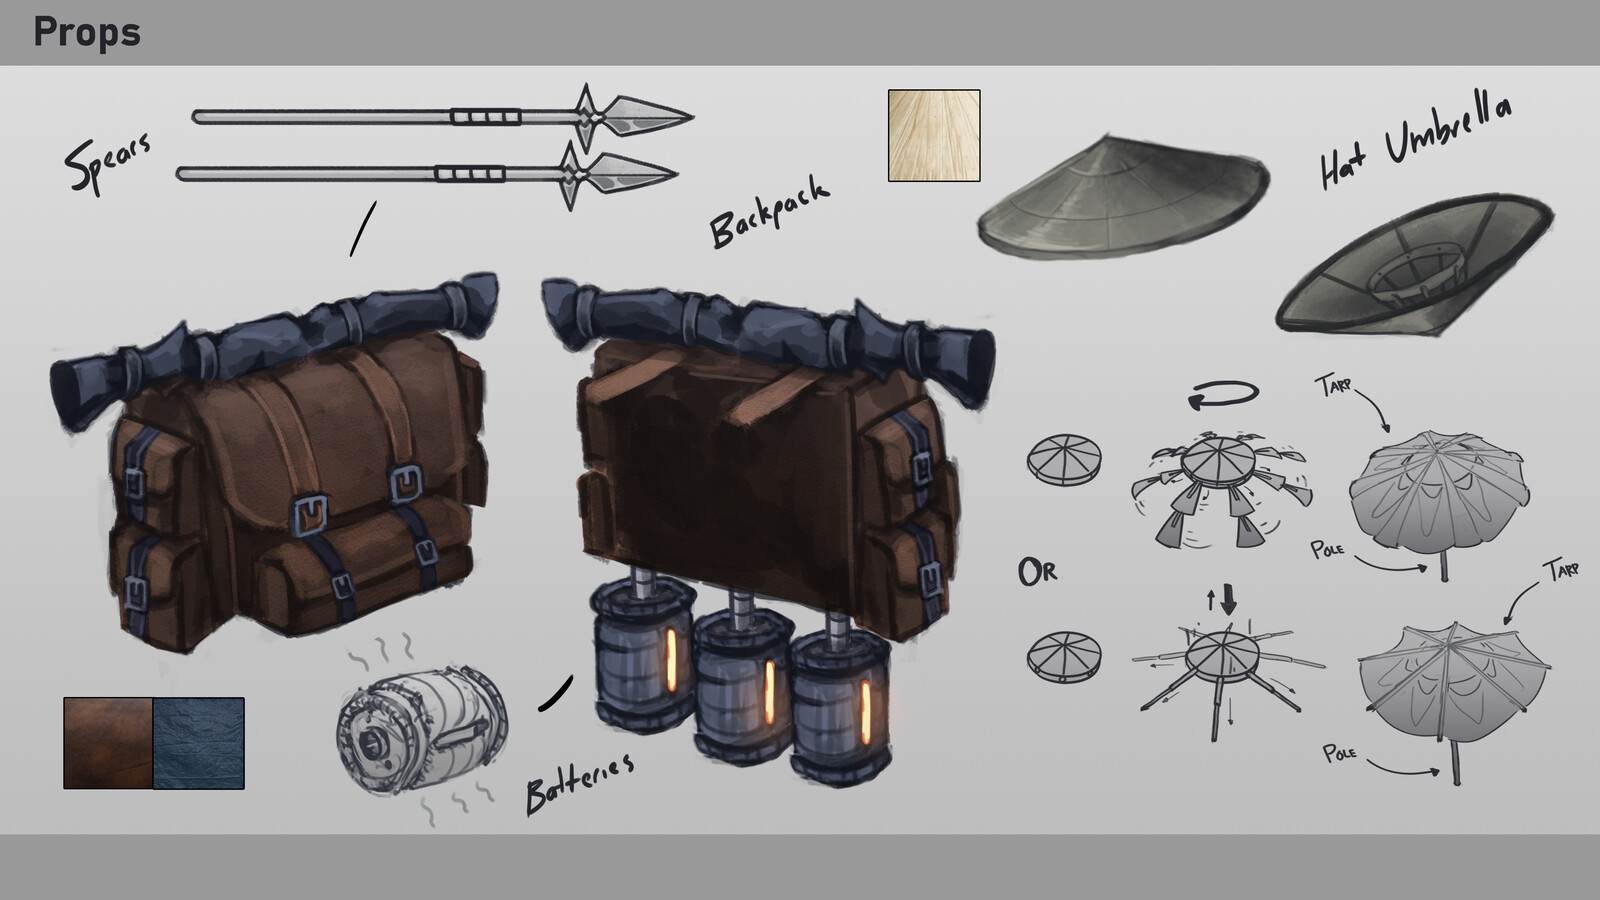 Designs for the backpack, items for sale, and how the hat can be turned into an umbrella.